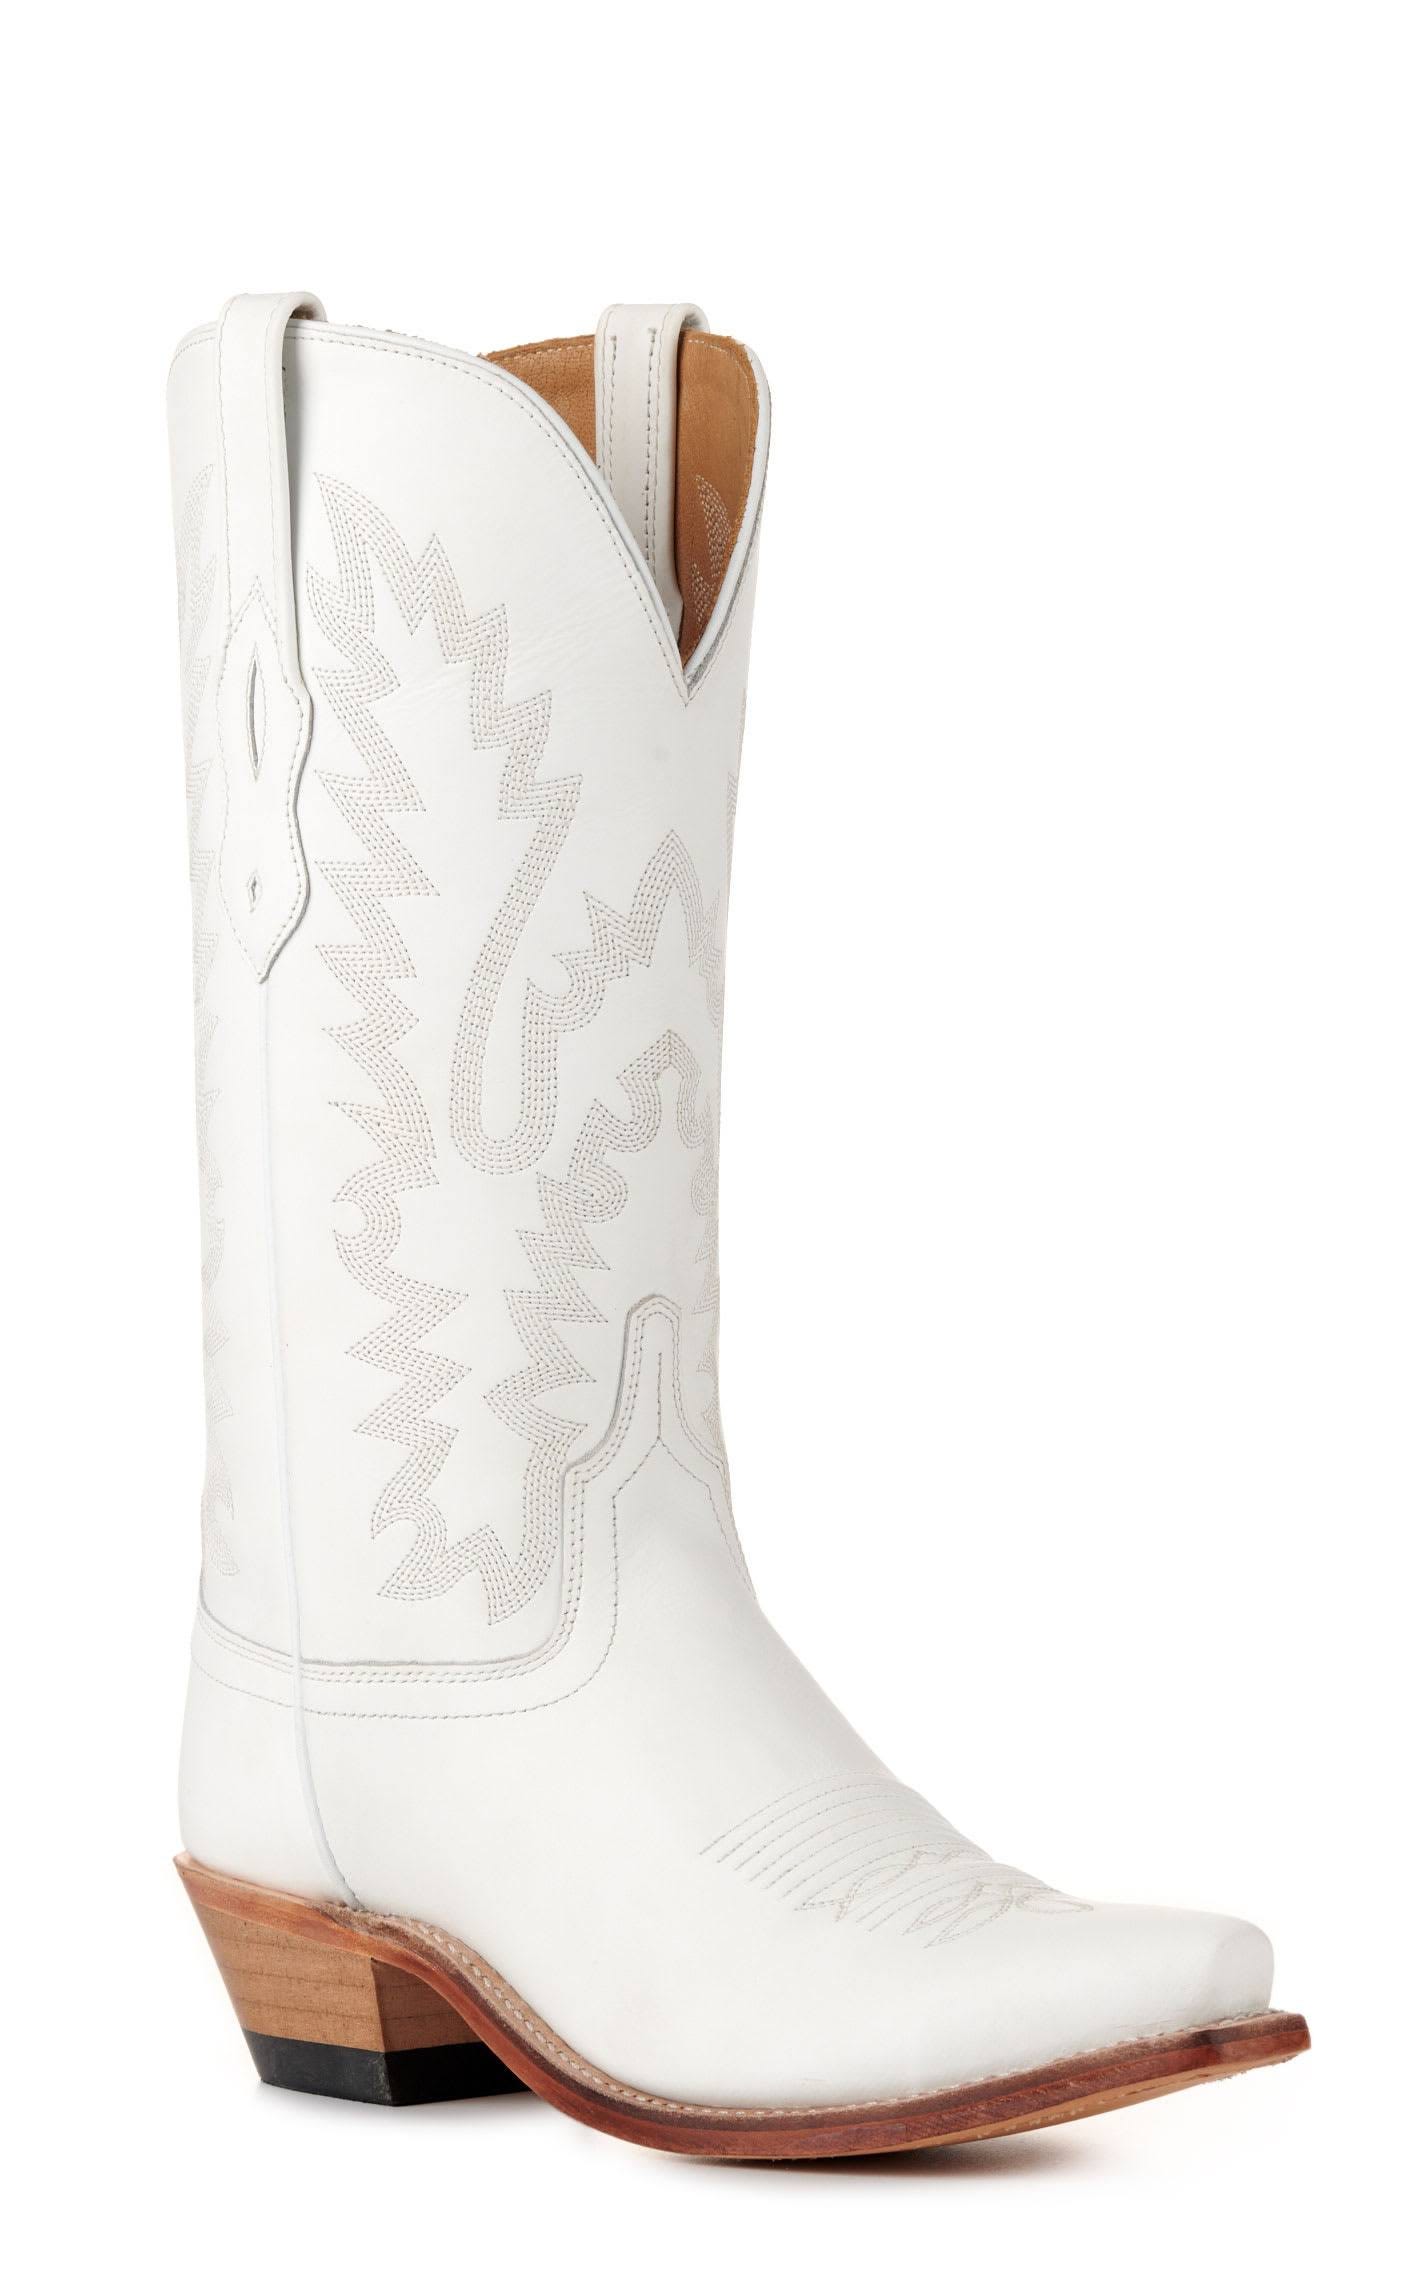 Old West Women's Insulated Hunting Boots - Perfect for Adventures | Image